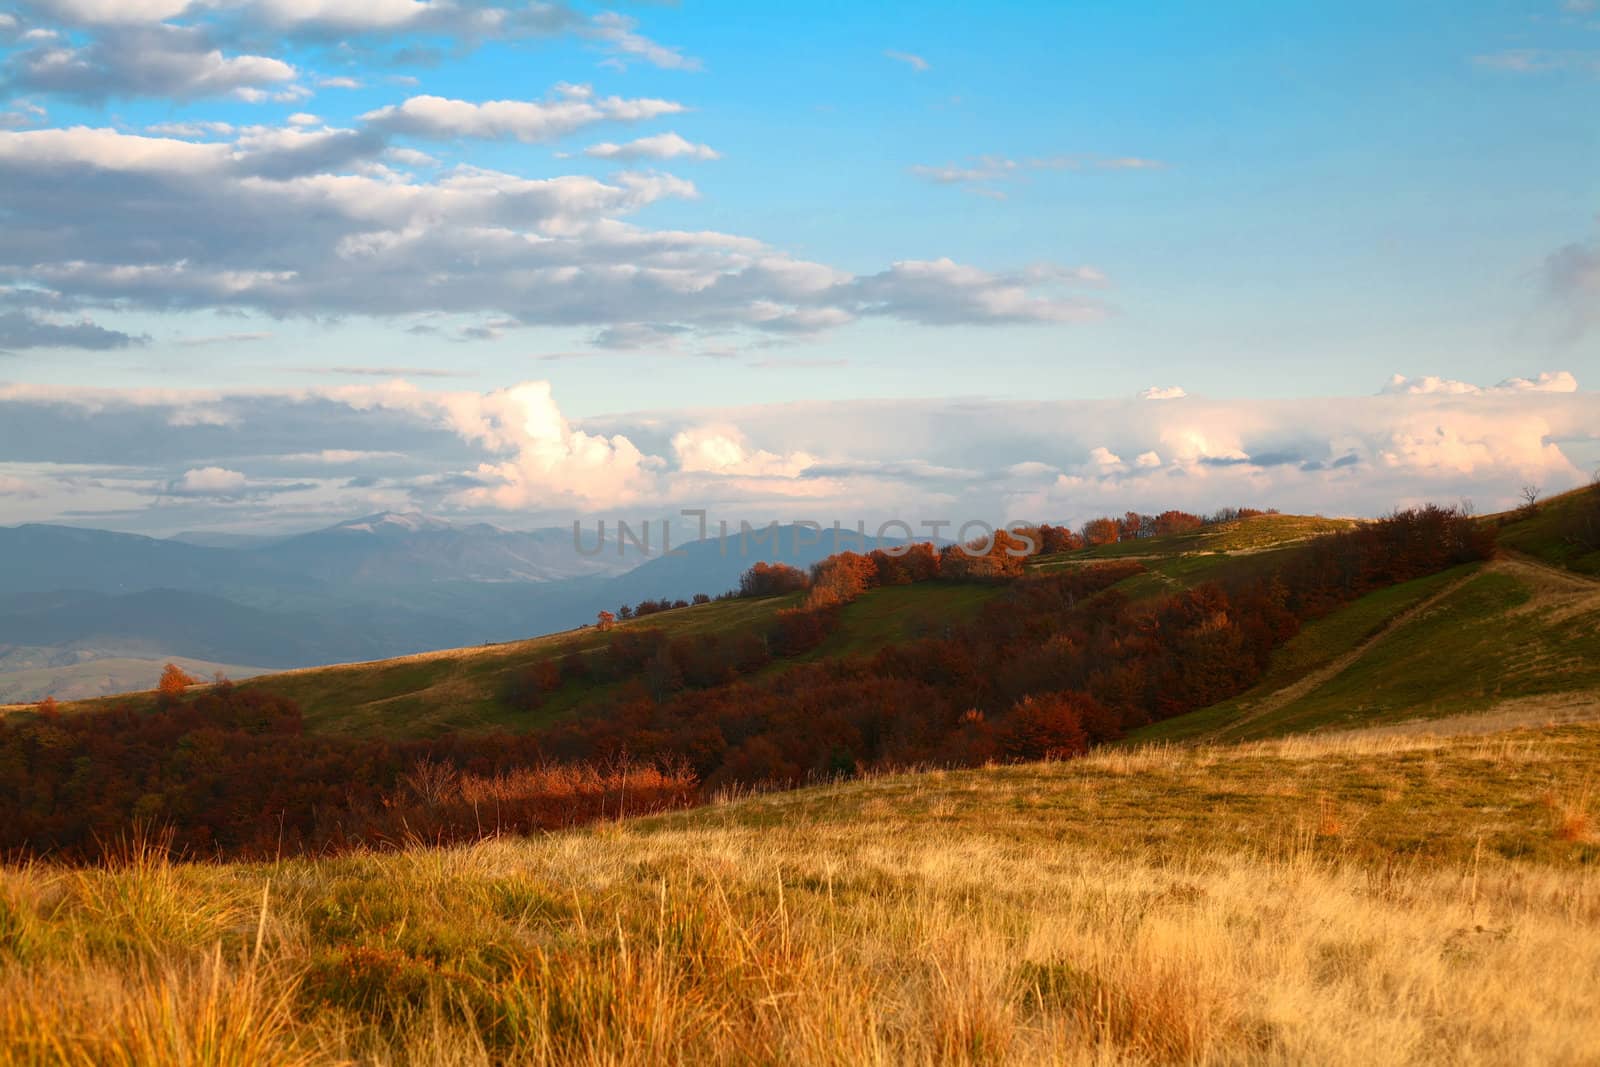 Autumn theme: an image of mountains under clouds